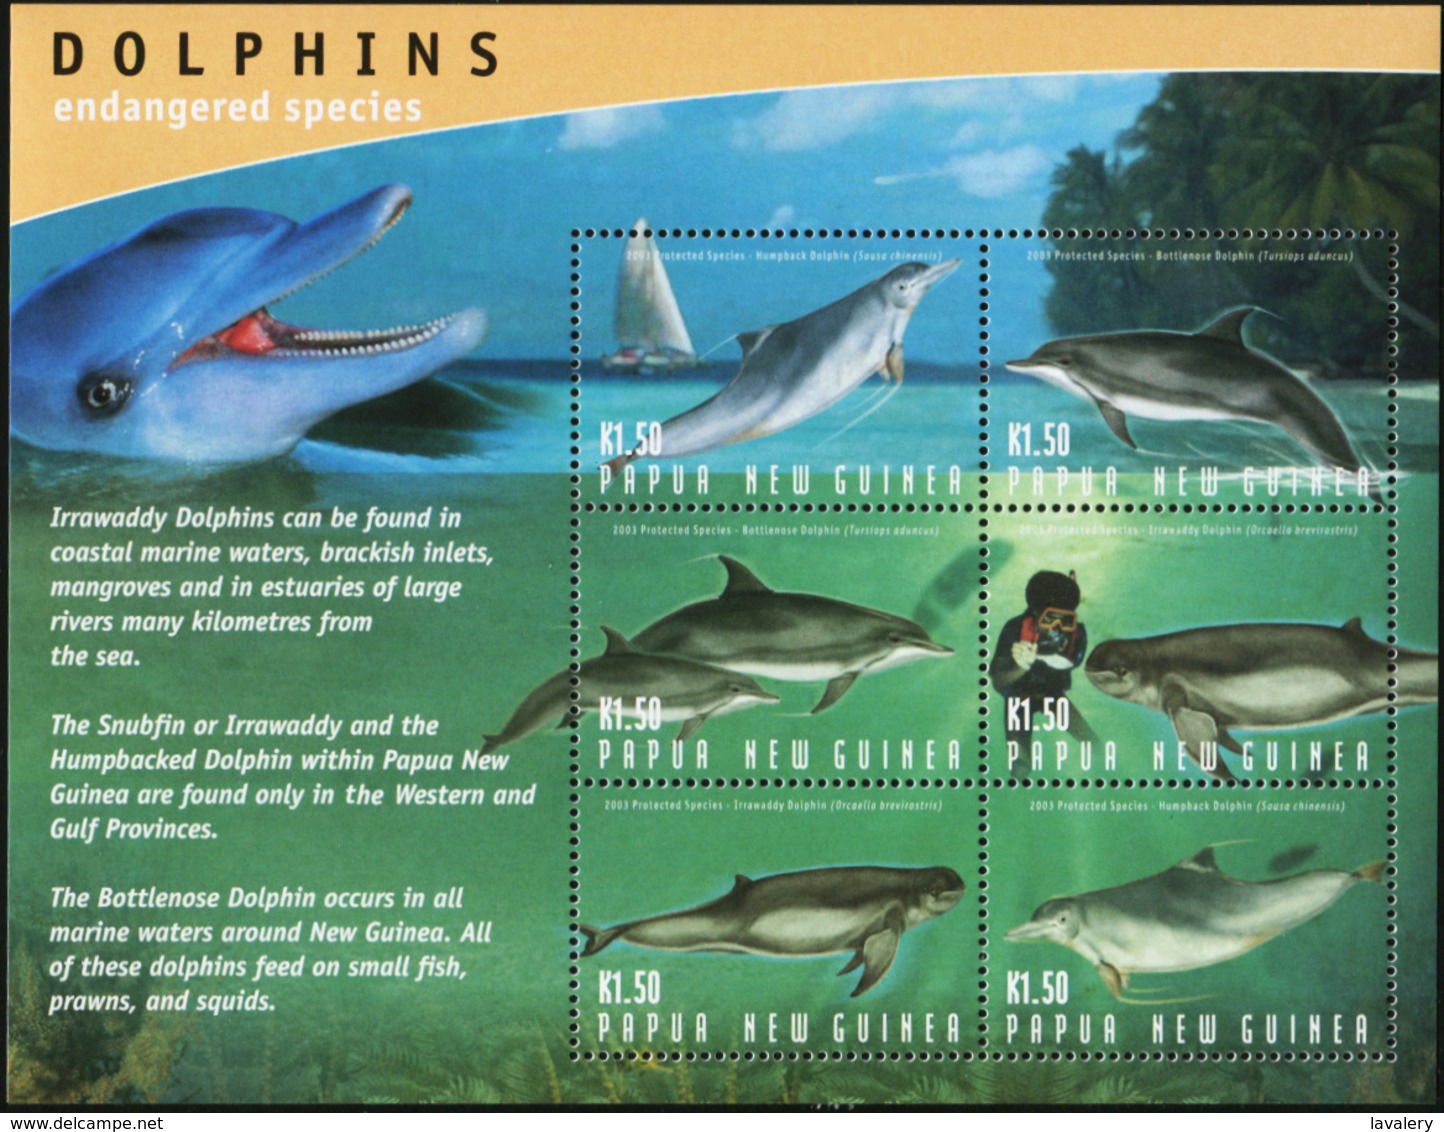 PAPUA NEW GUINEA 2003 Endangered Species Dolphins Marine Mammals Animals Fauna MNH - Dolphins